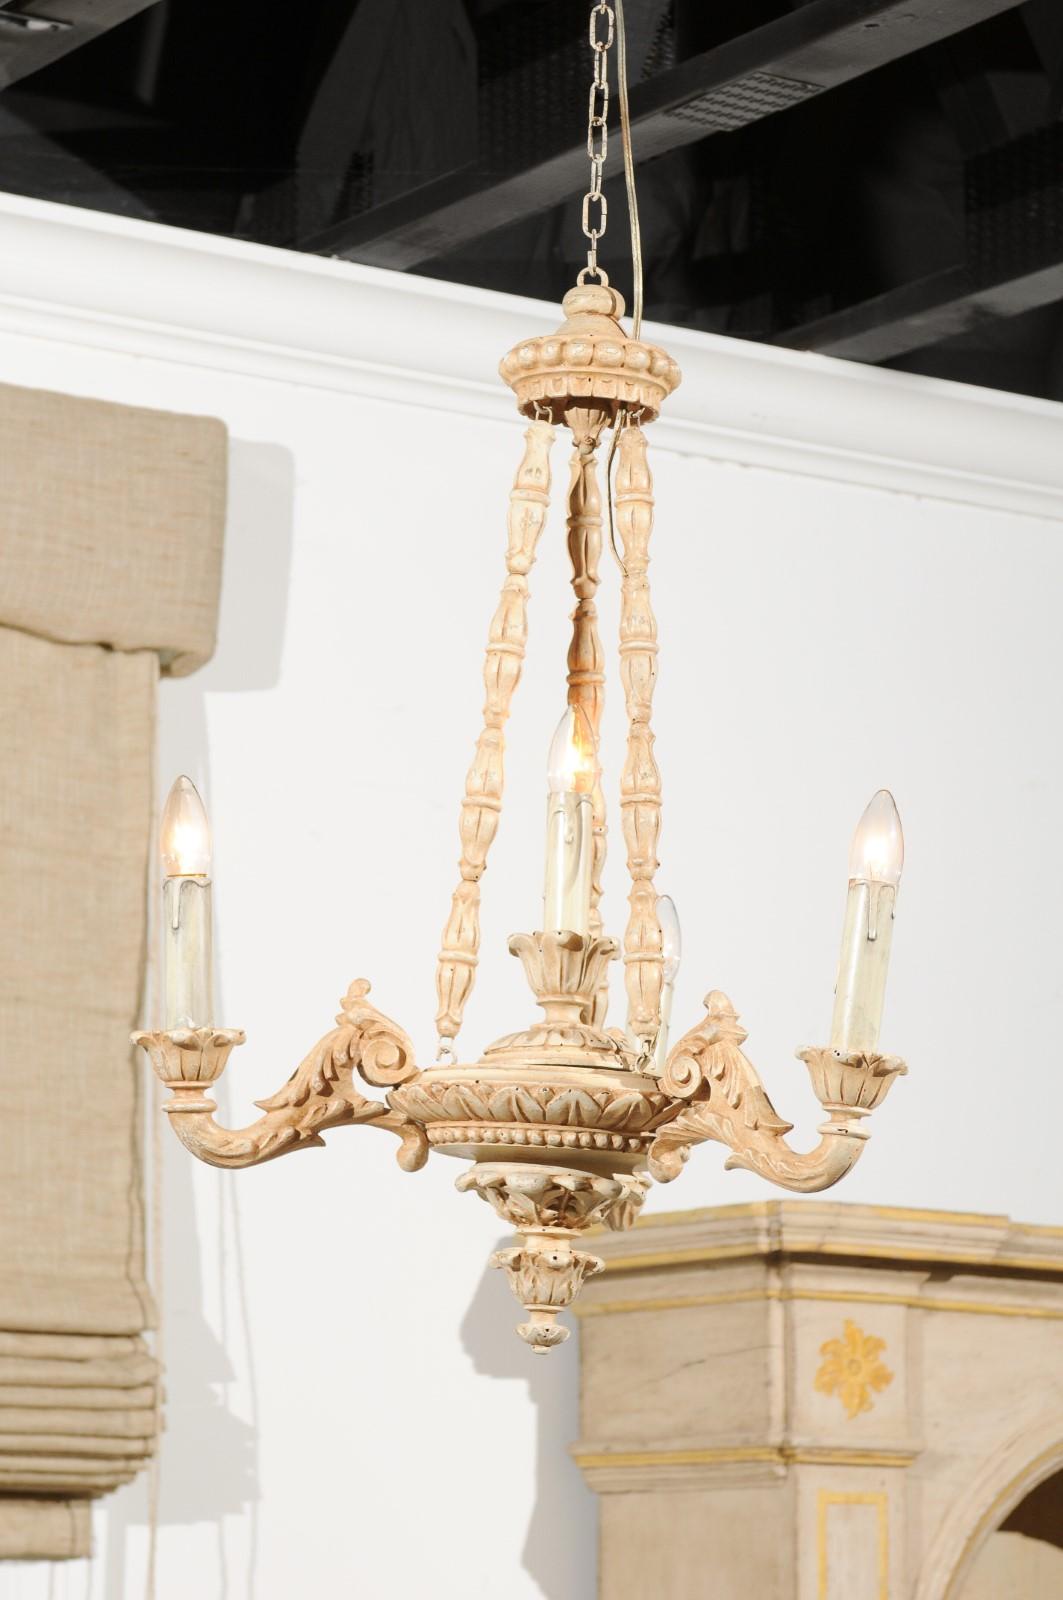 An Italian painted and carved wooden three-light chandelier from the 19th century, with scrolling arms and rais-de-cœur motifs. Born in Italy during the 19th century, this chandelier features a crown-shaped canopy connected to three carved wooden